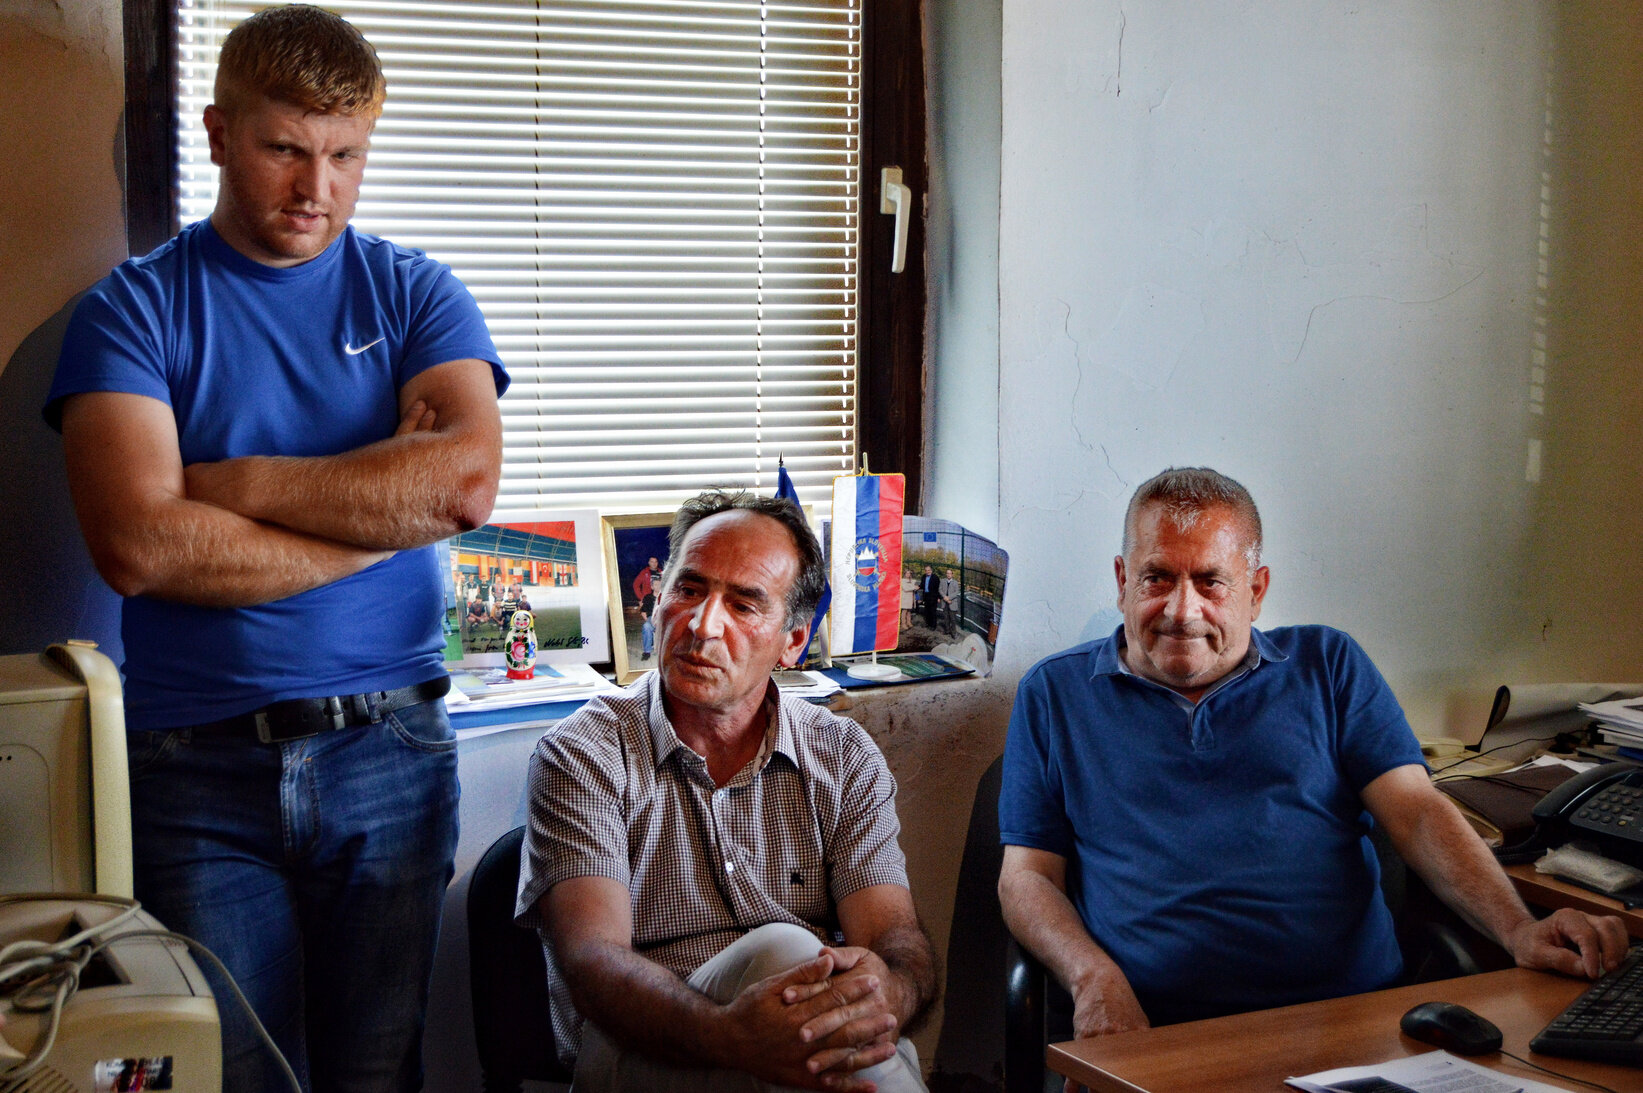 Farmers from the multi-ethnic farmers’ association discuss recent UN agricultural projects.